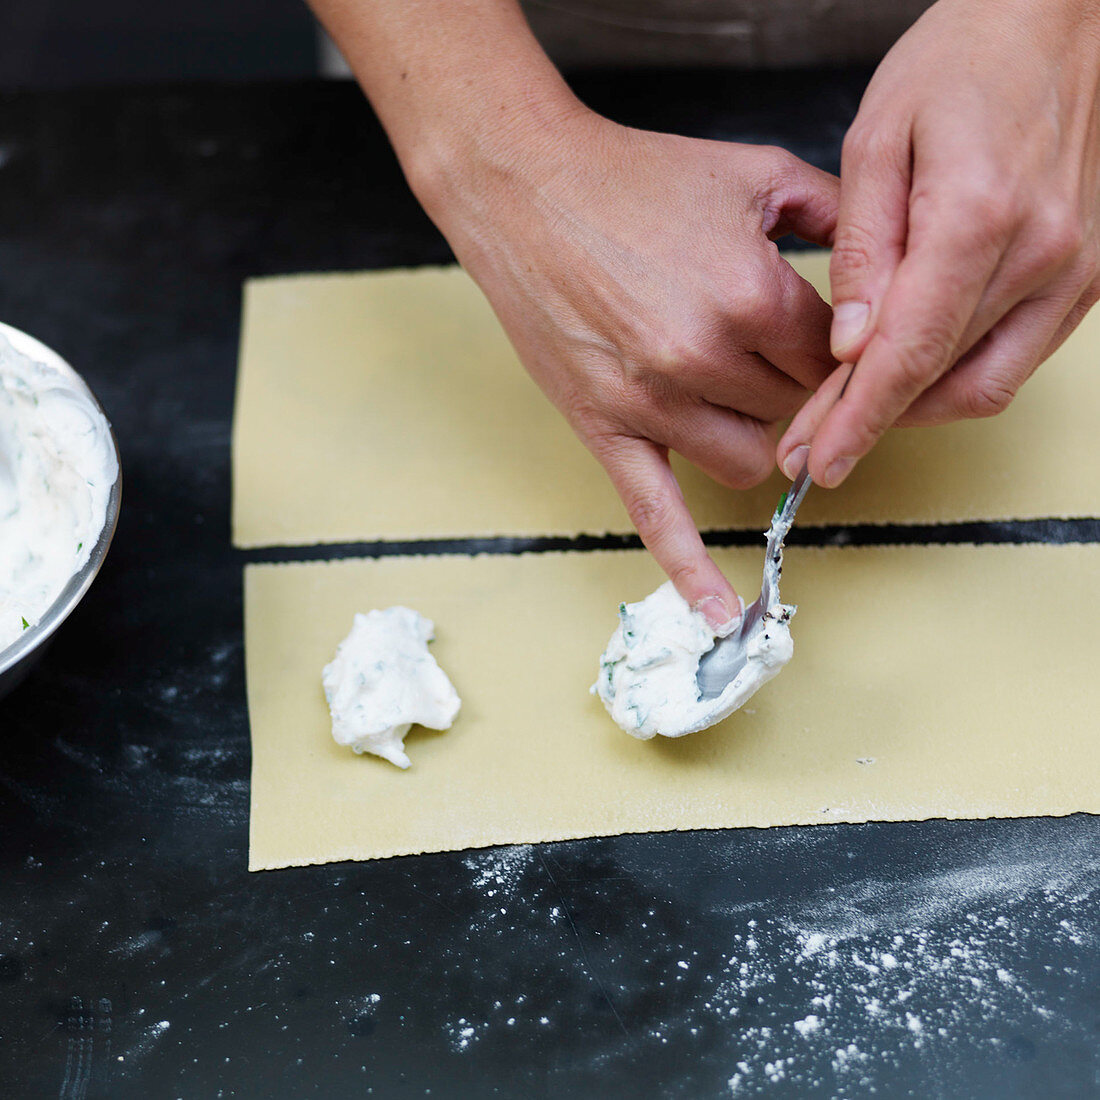 Preparing stuffed pasta: place the filling on the dough sheet